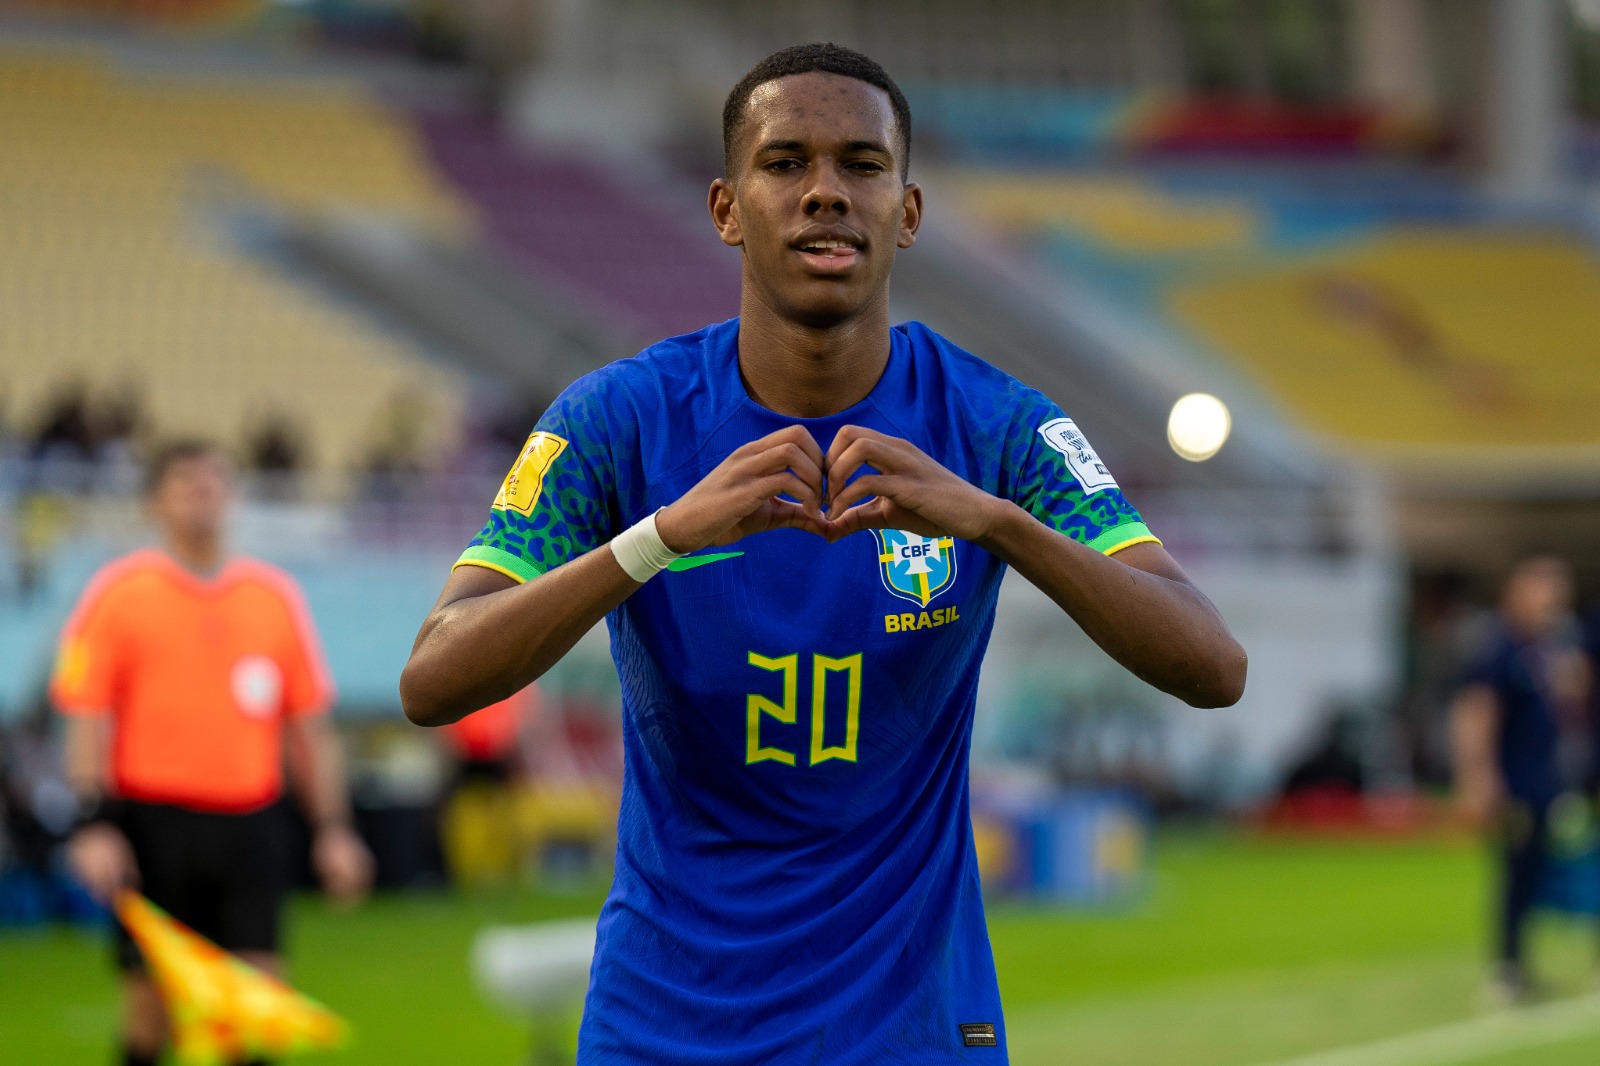 Football España on X: "MD say that Real Madrid contacted Palmeiras  yesterday to discuss the possibility of signing Estevao Willian. The  16-year-old, who is a Barcelona fan, has been lighting up the